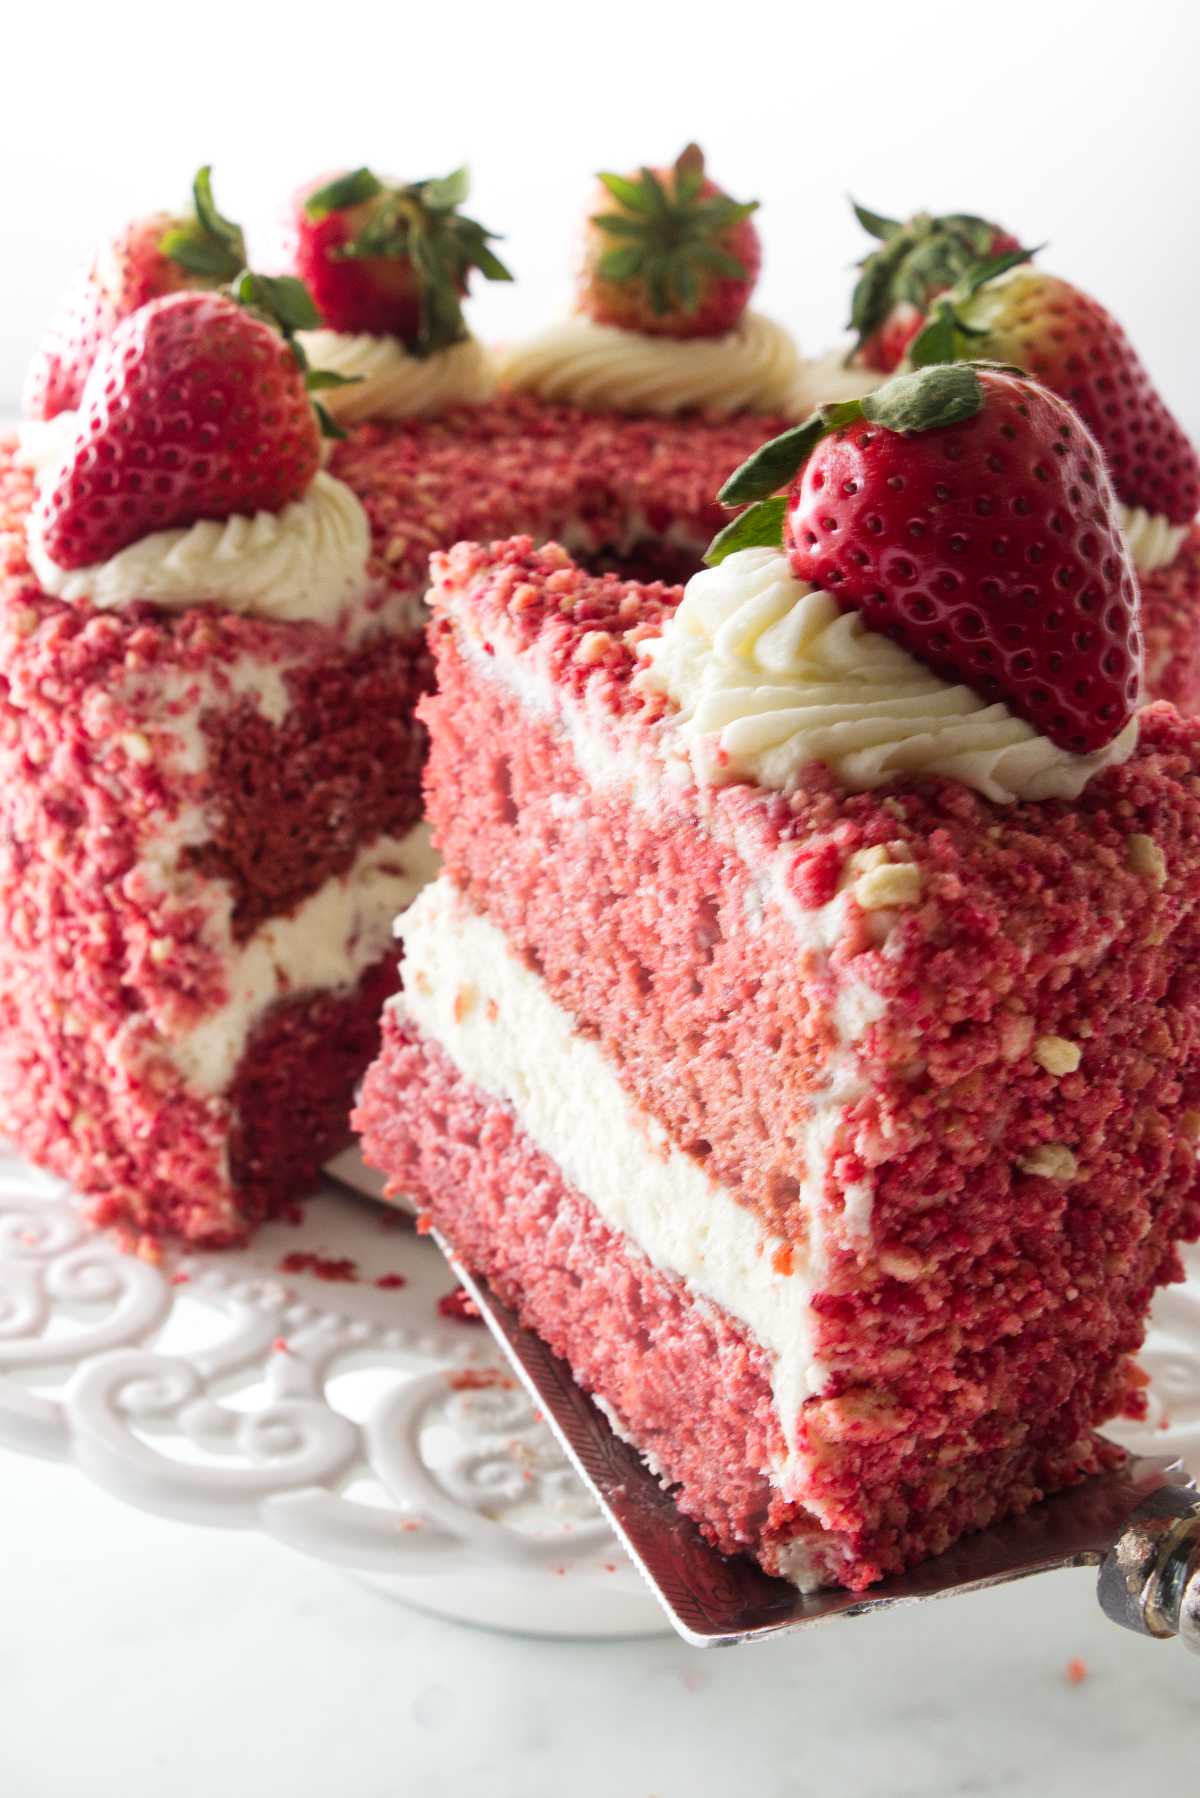 Serving a slice of strawberry cake.